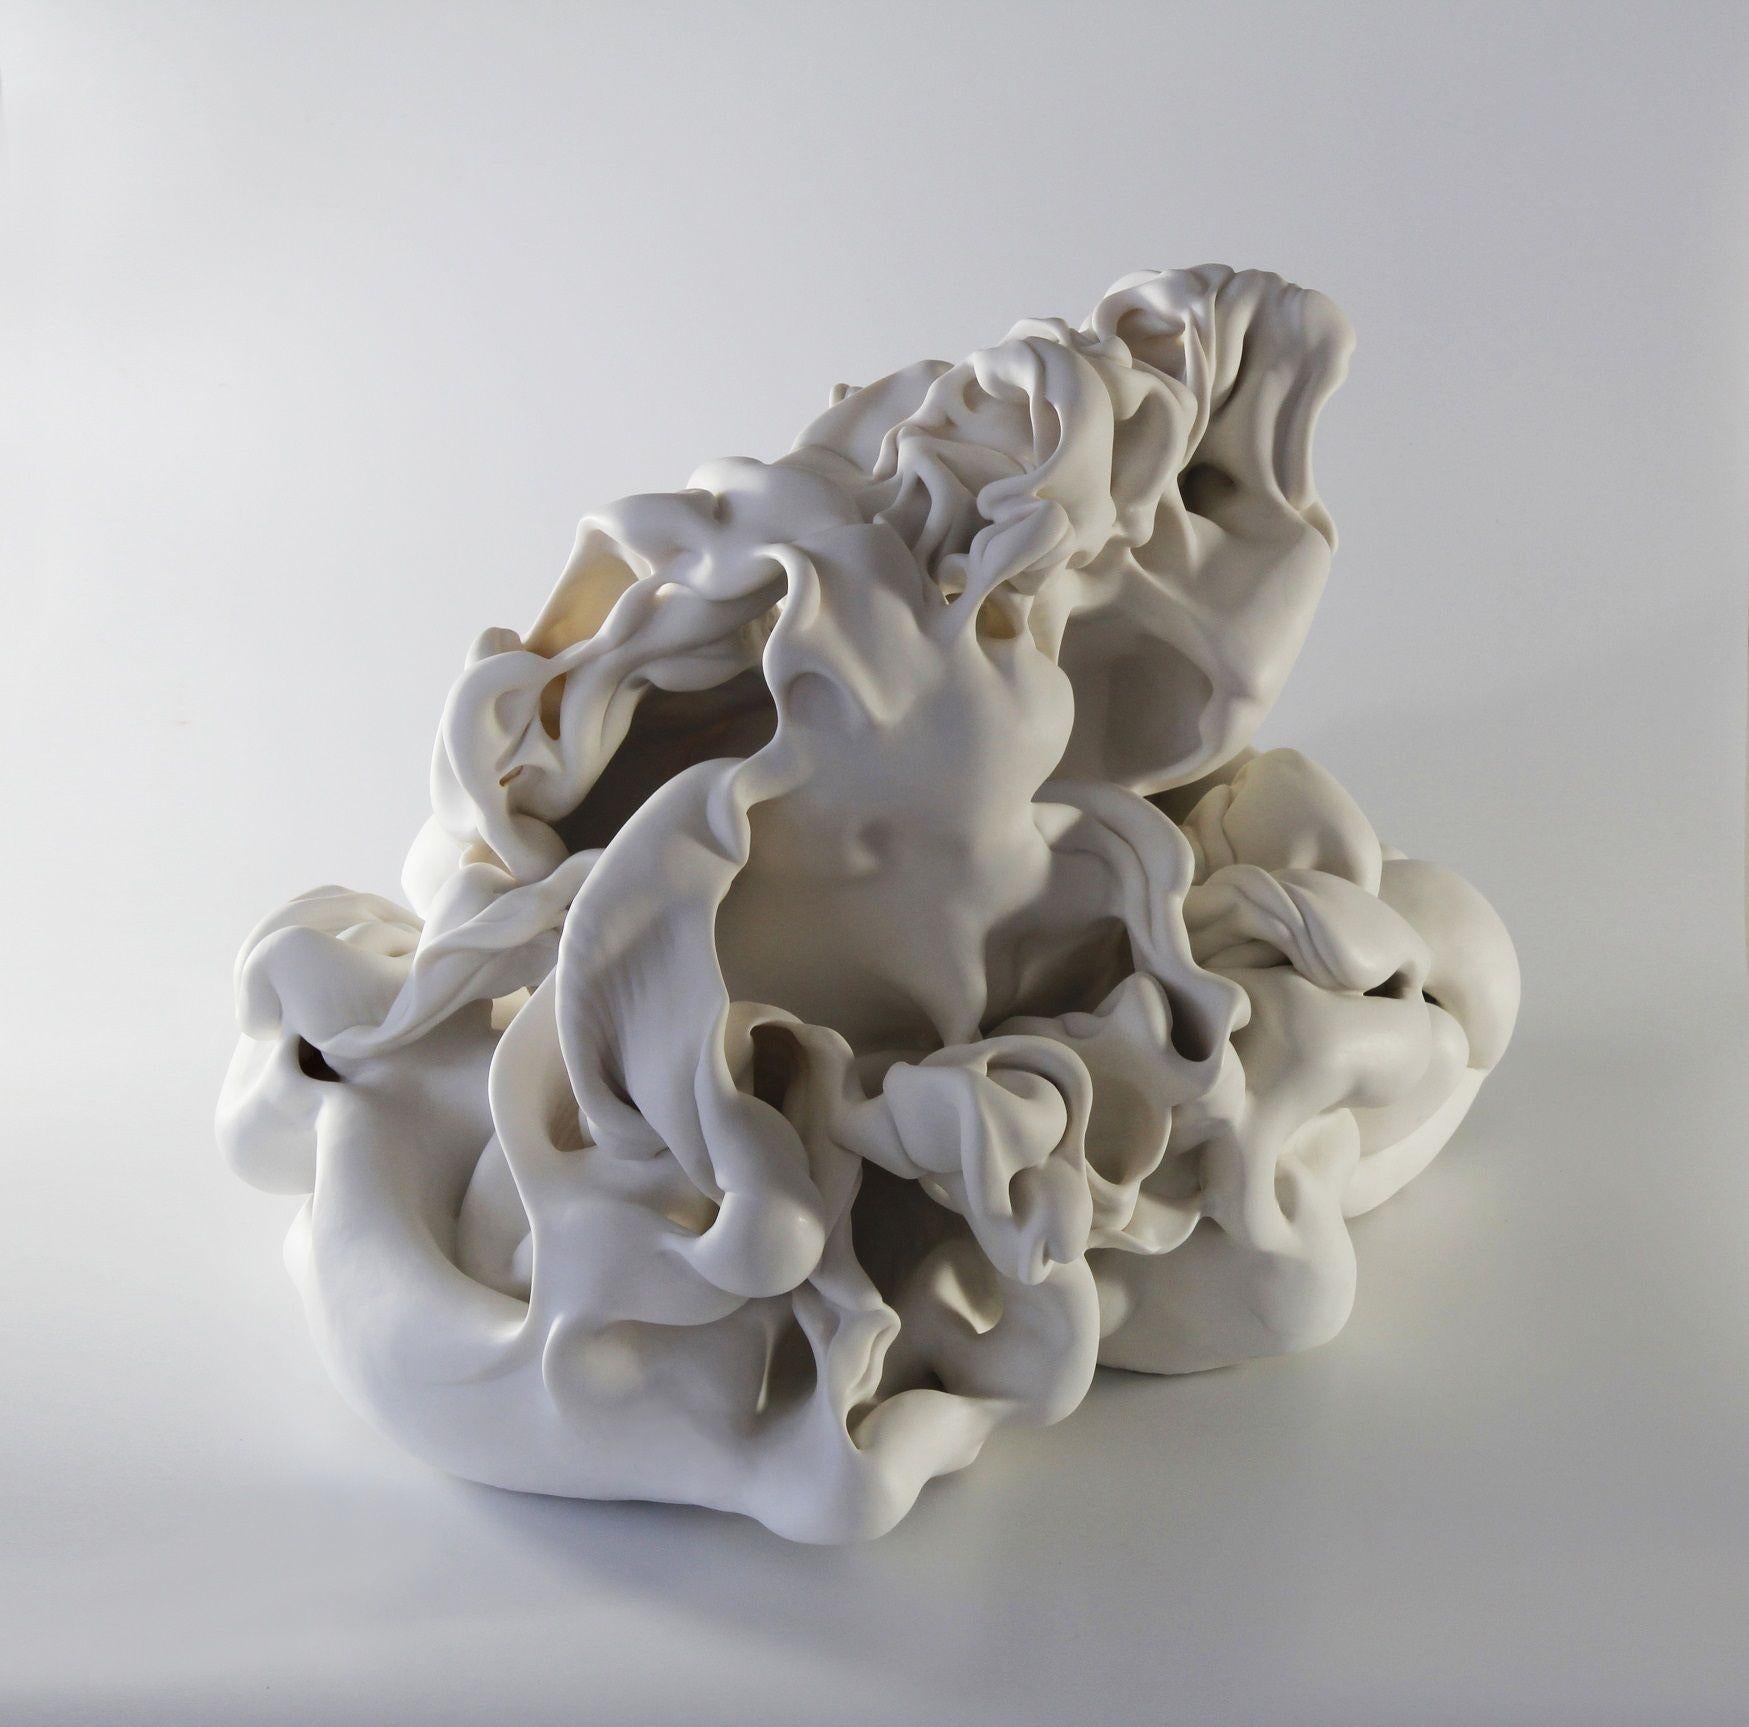 Untitled 4 by Sharon Brill - Abstract porcelain sculpture, organic forms, white For Sale 1